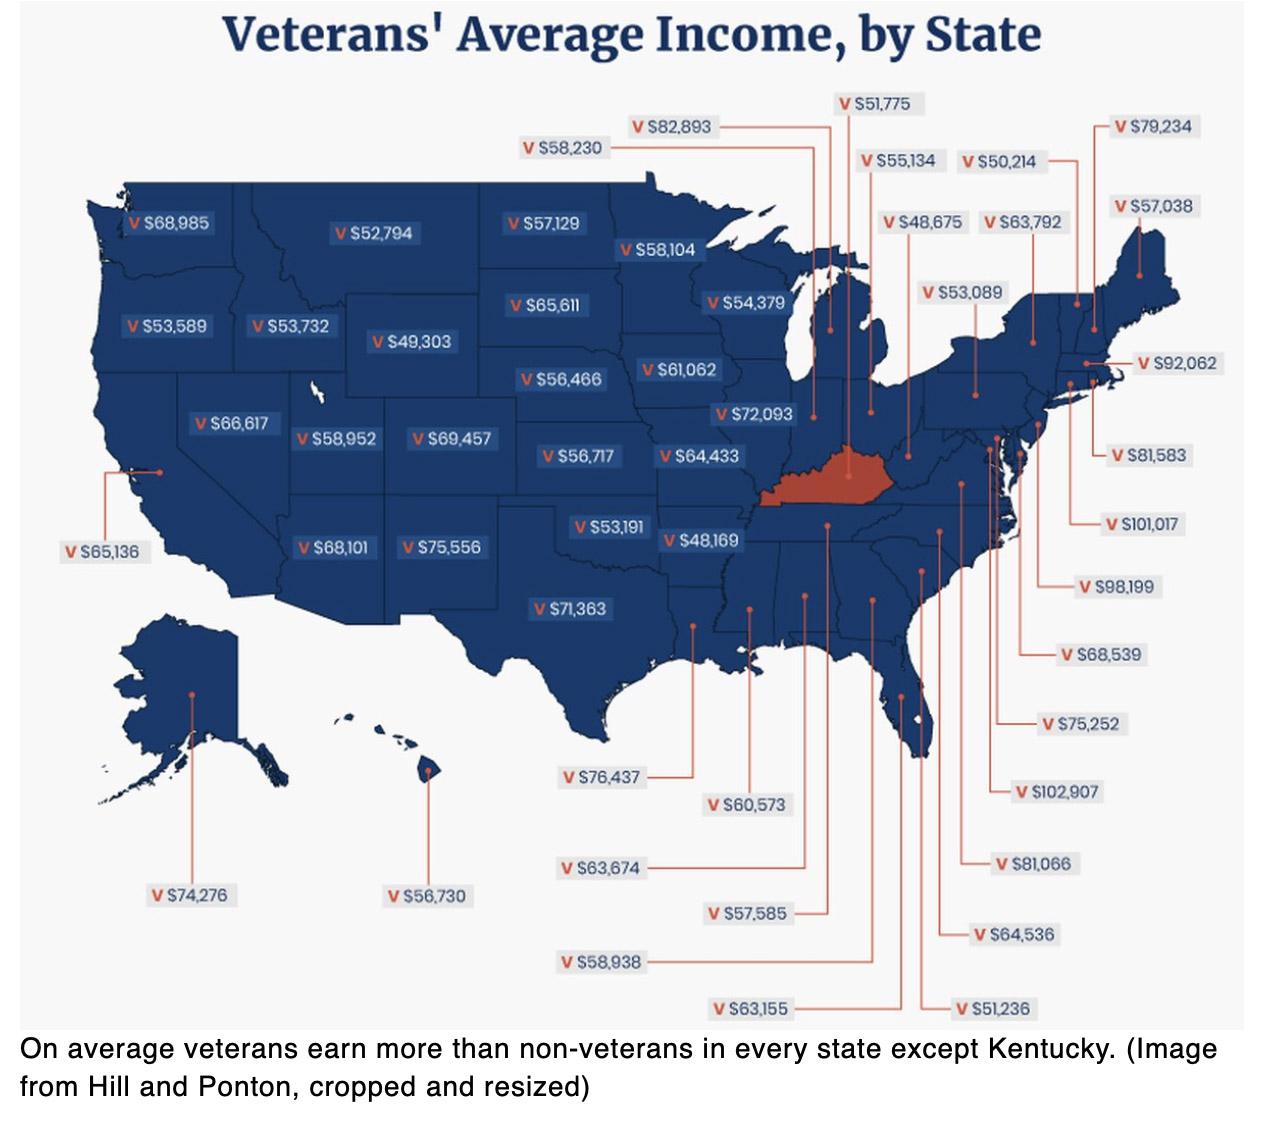  These are the states and jobs where veterans make the most money